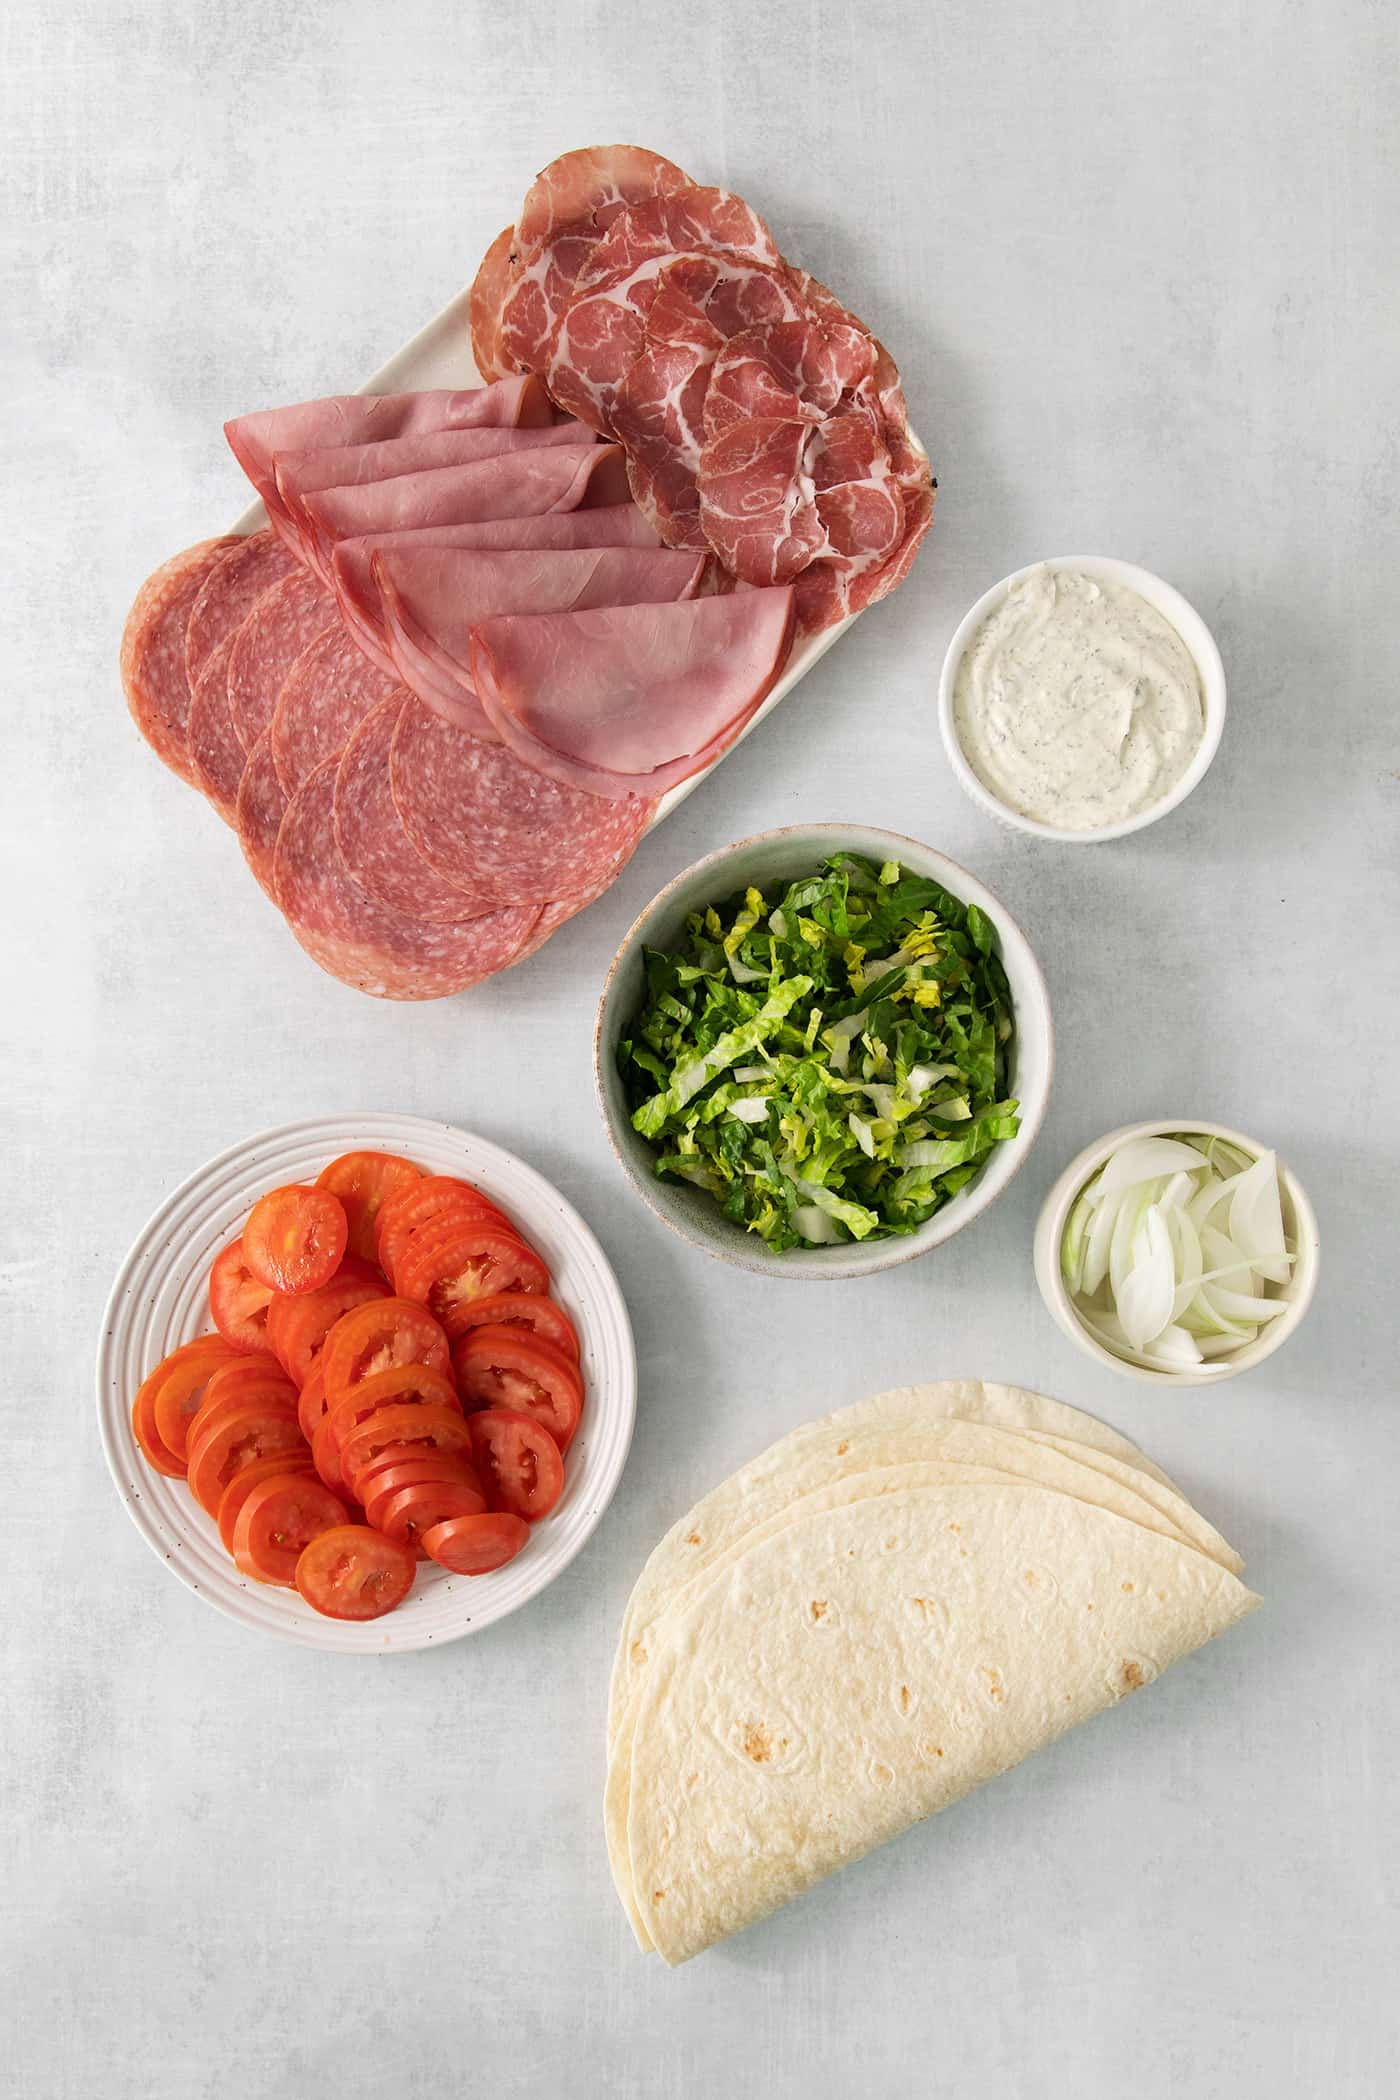 Ingredients for Italian pinwheels: meat, tomatoes, lettuce, cheese, and tortillas.